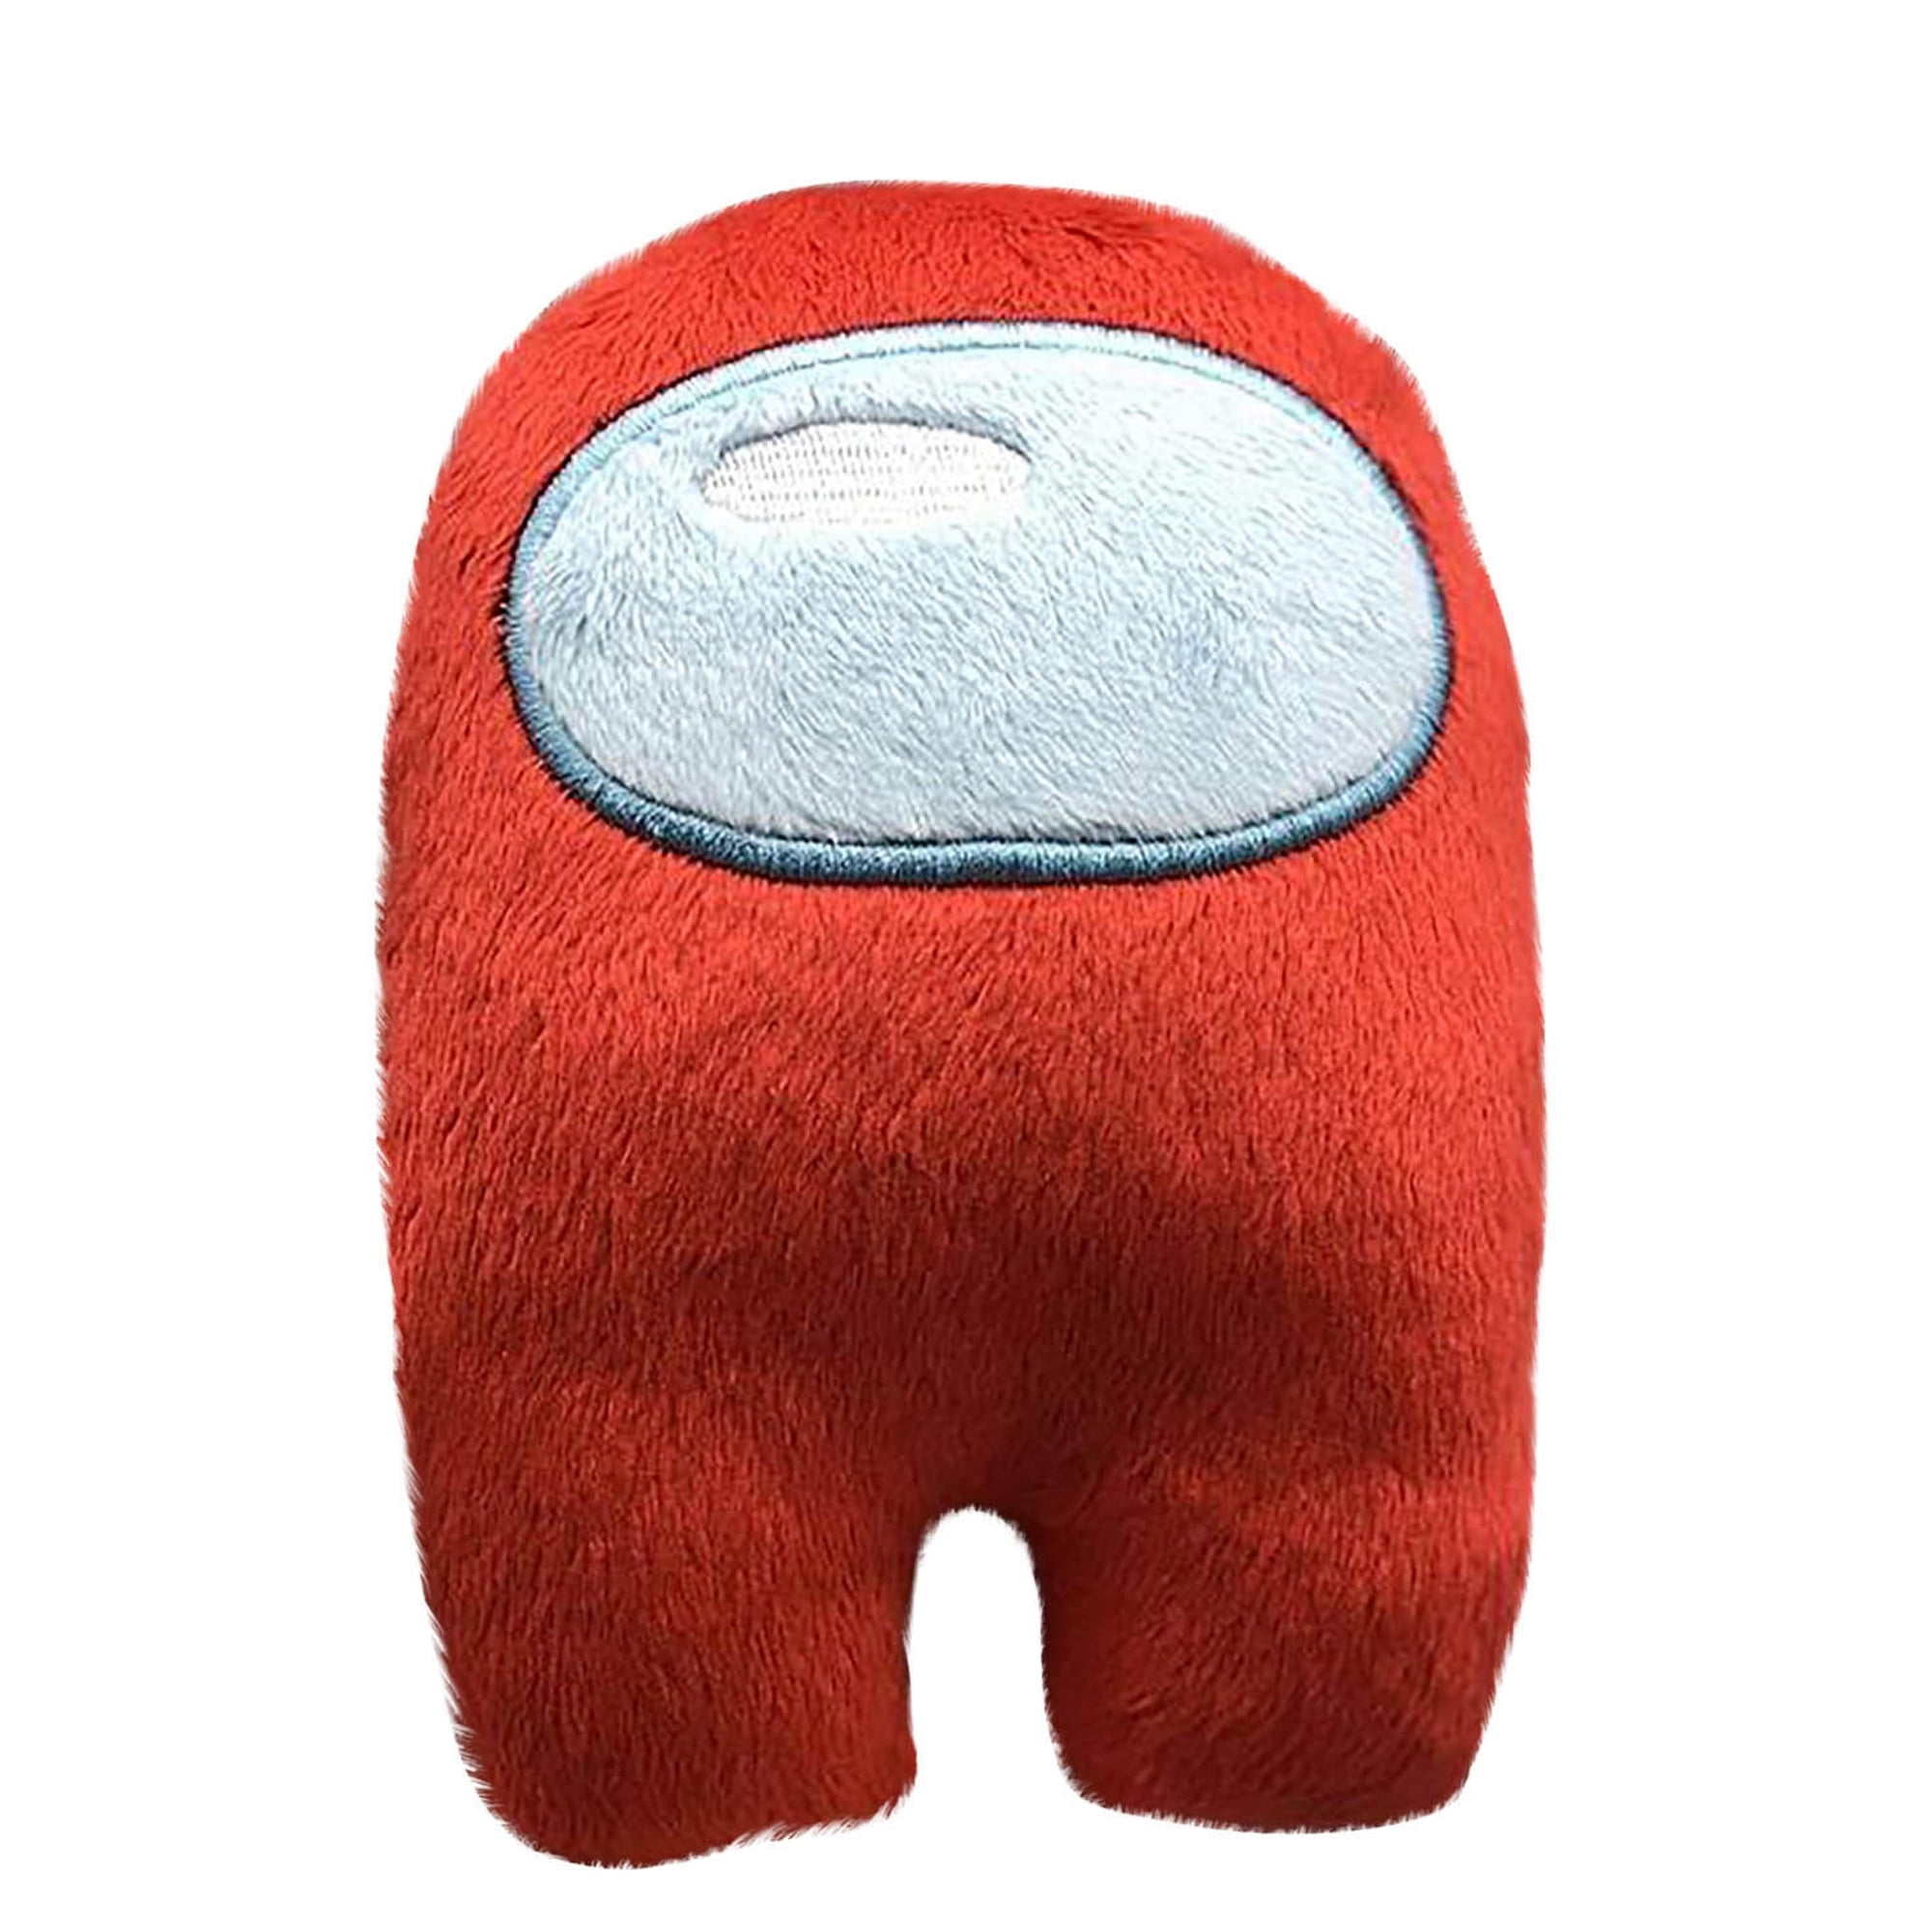 Details about   Toy Among us Game Plush Soft Stuffed Toy Dolls Figure Plushies Kids Child Gift